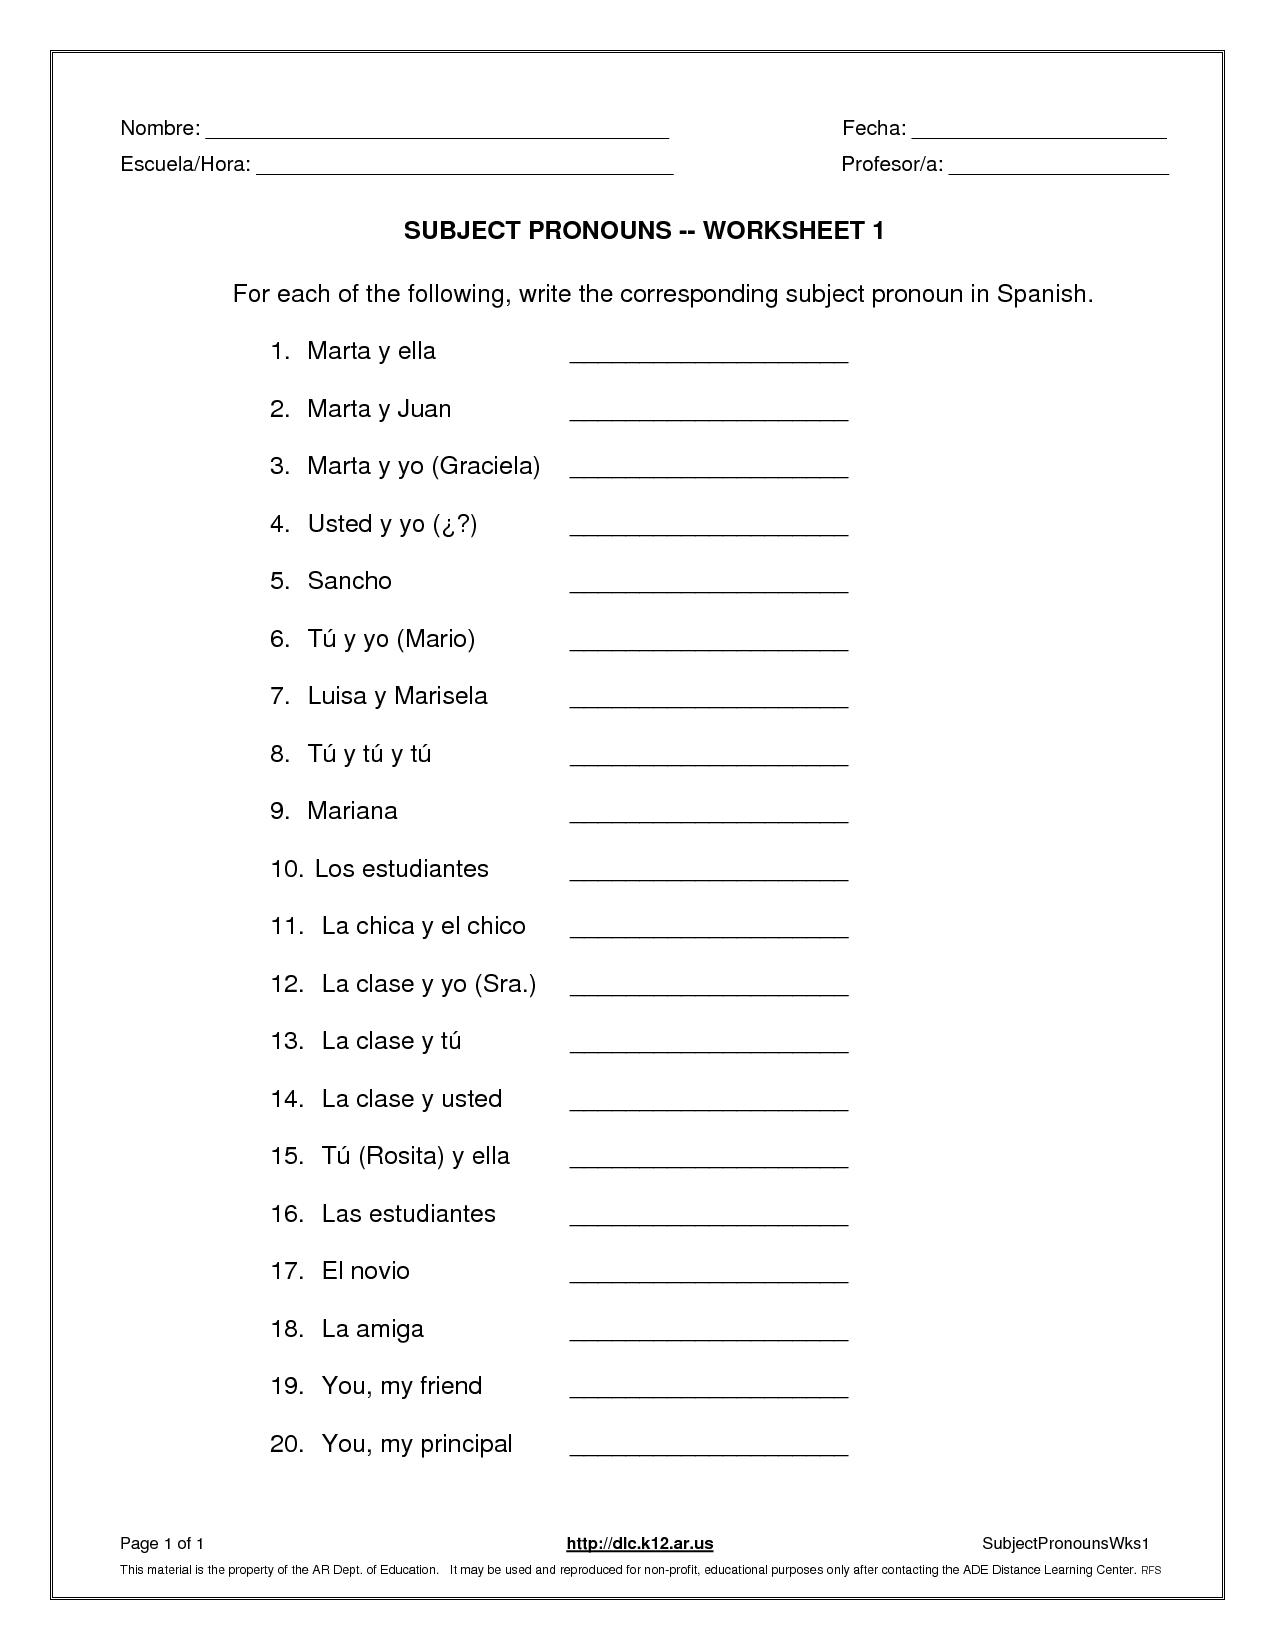 personal-pronouns-online-and-pdf-worksheet-by-superenglishland